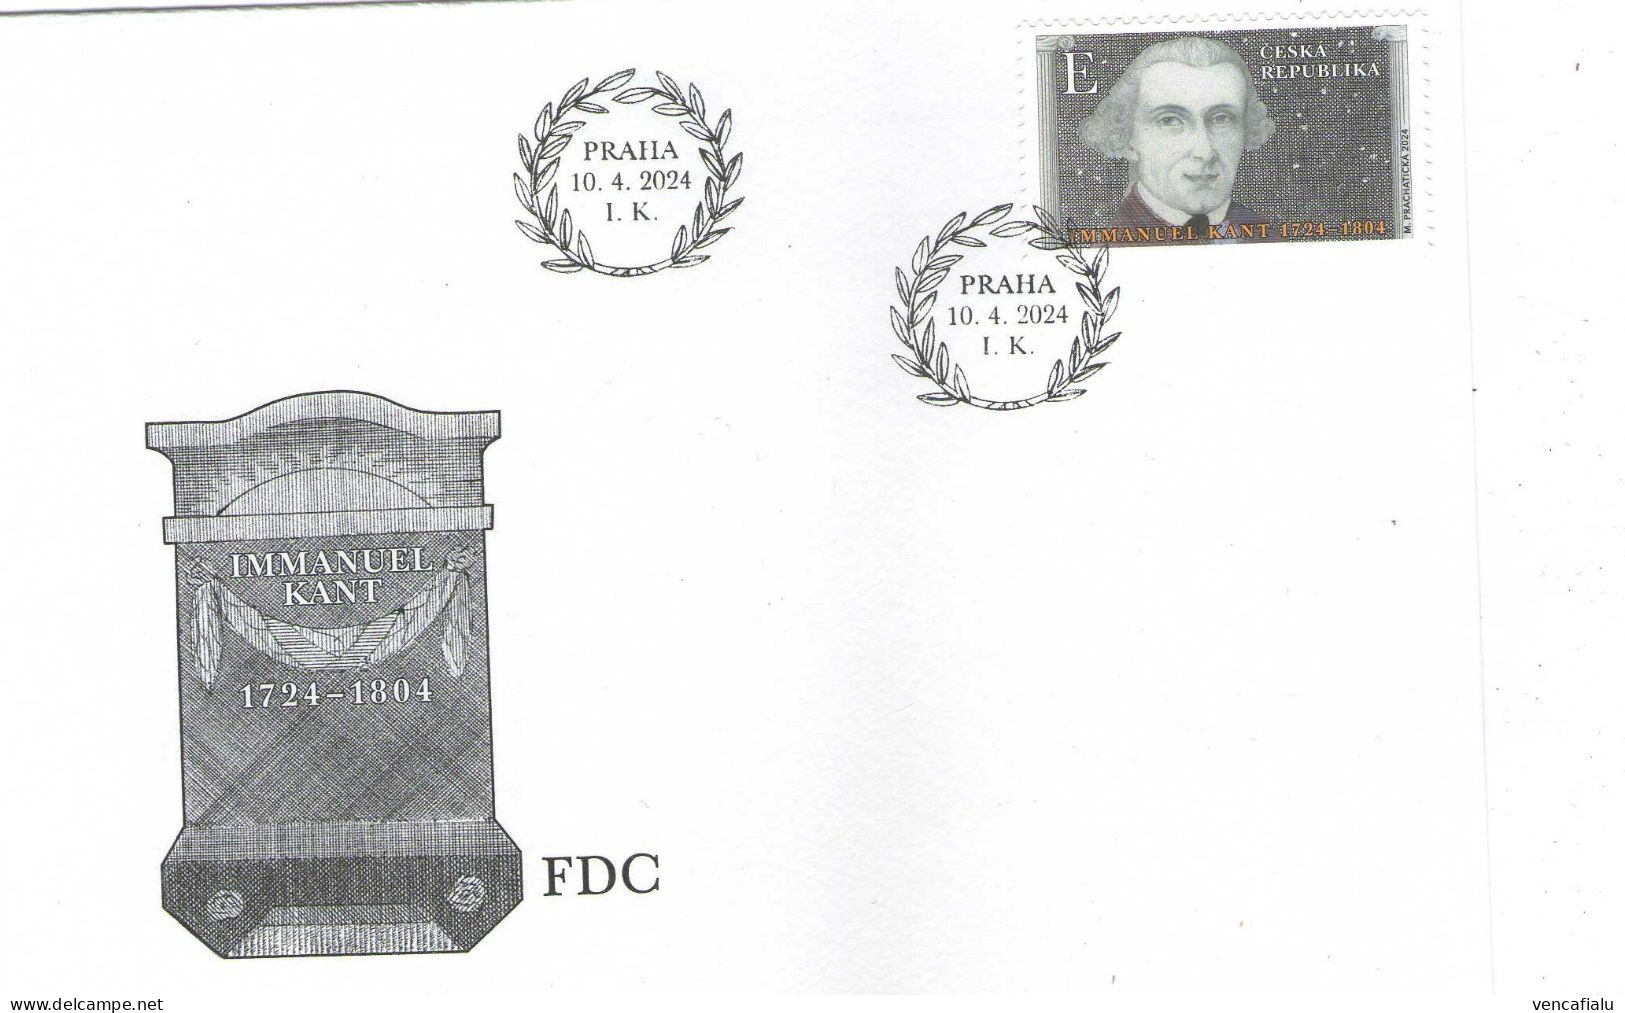 Year 2024 - Immanuel Kant, FDC - FDC